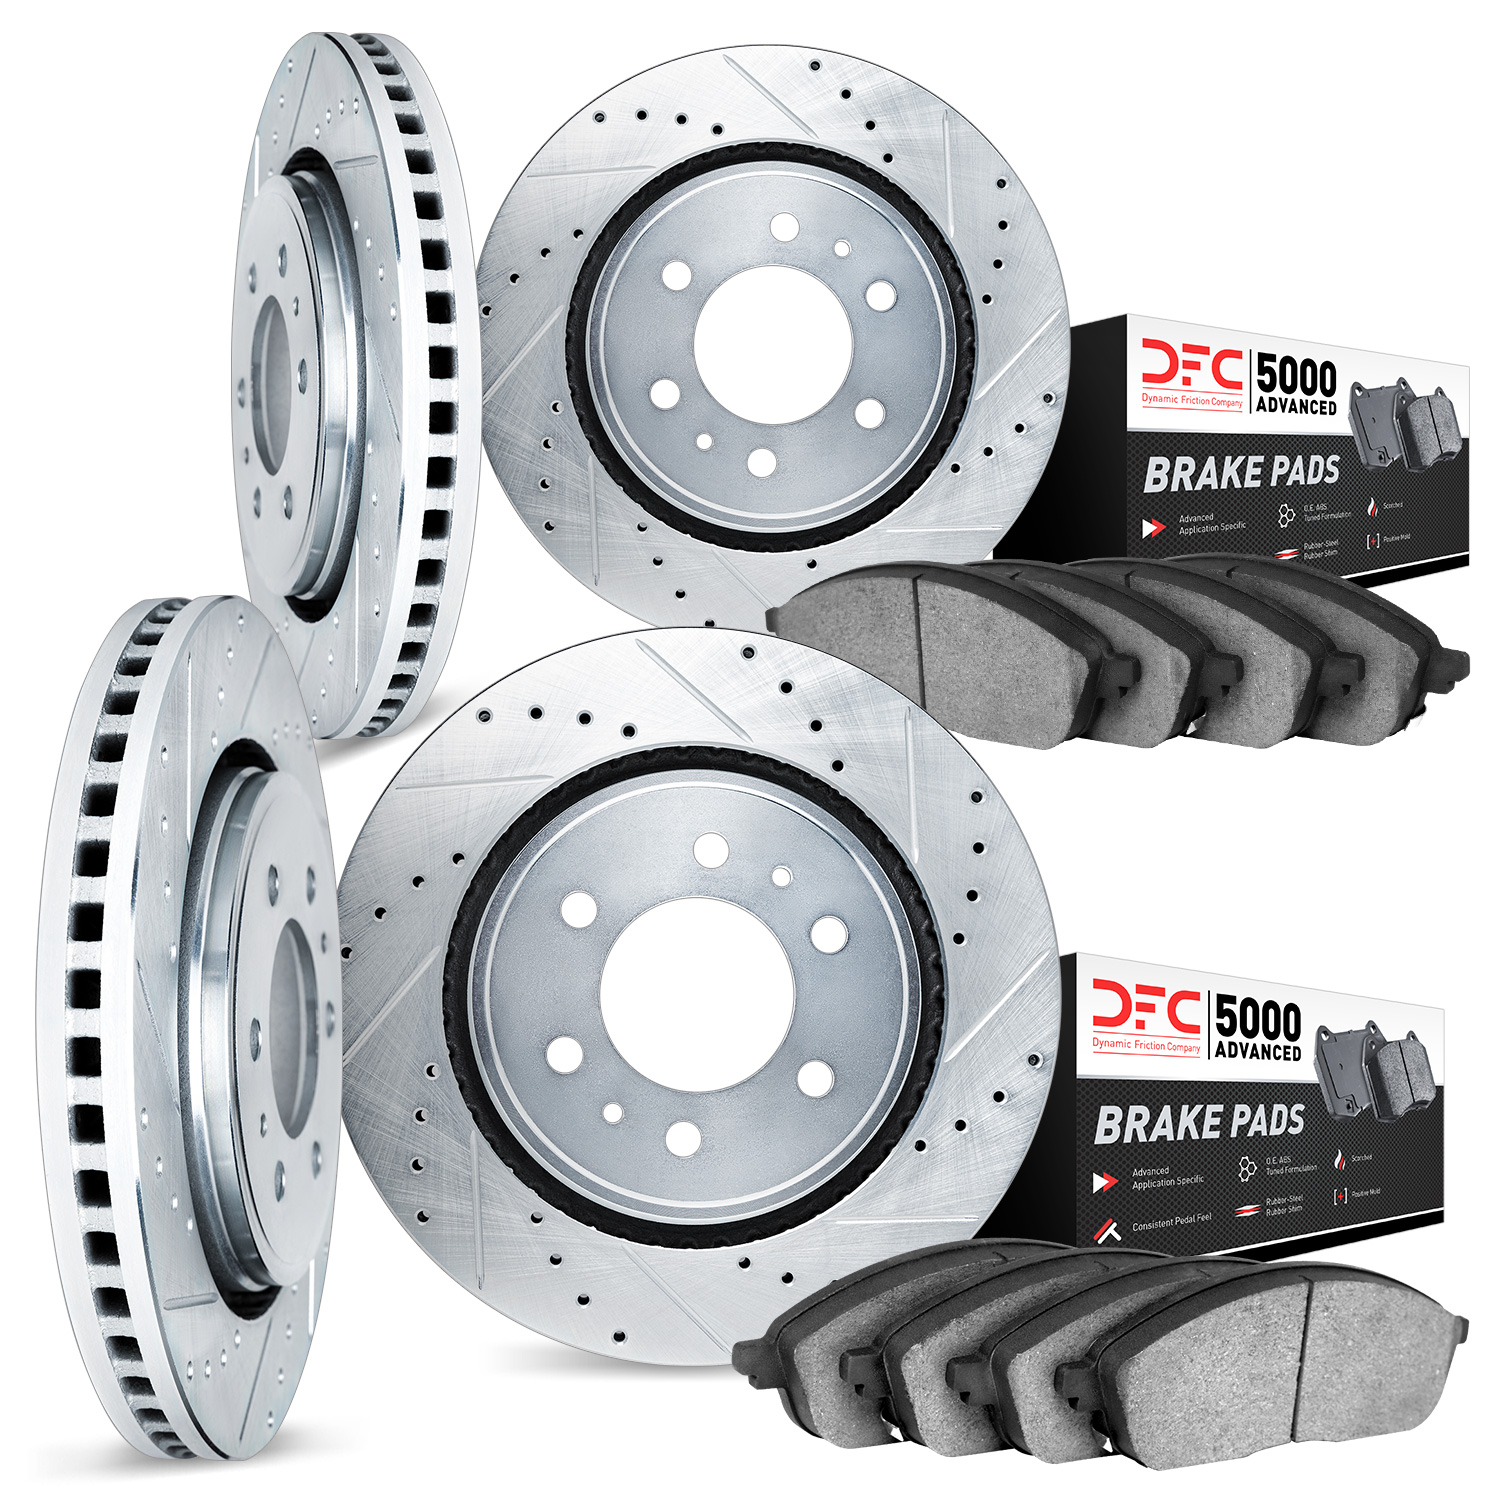 7504-67114 Drilled/Slotted Brake Rotors w/5000 Advanced Brake Pads Kit [Silver], Fits Select Infiniti/Nissan, Position: Front an